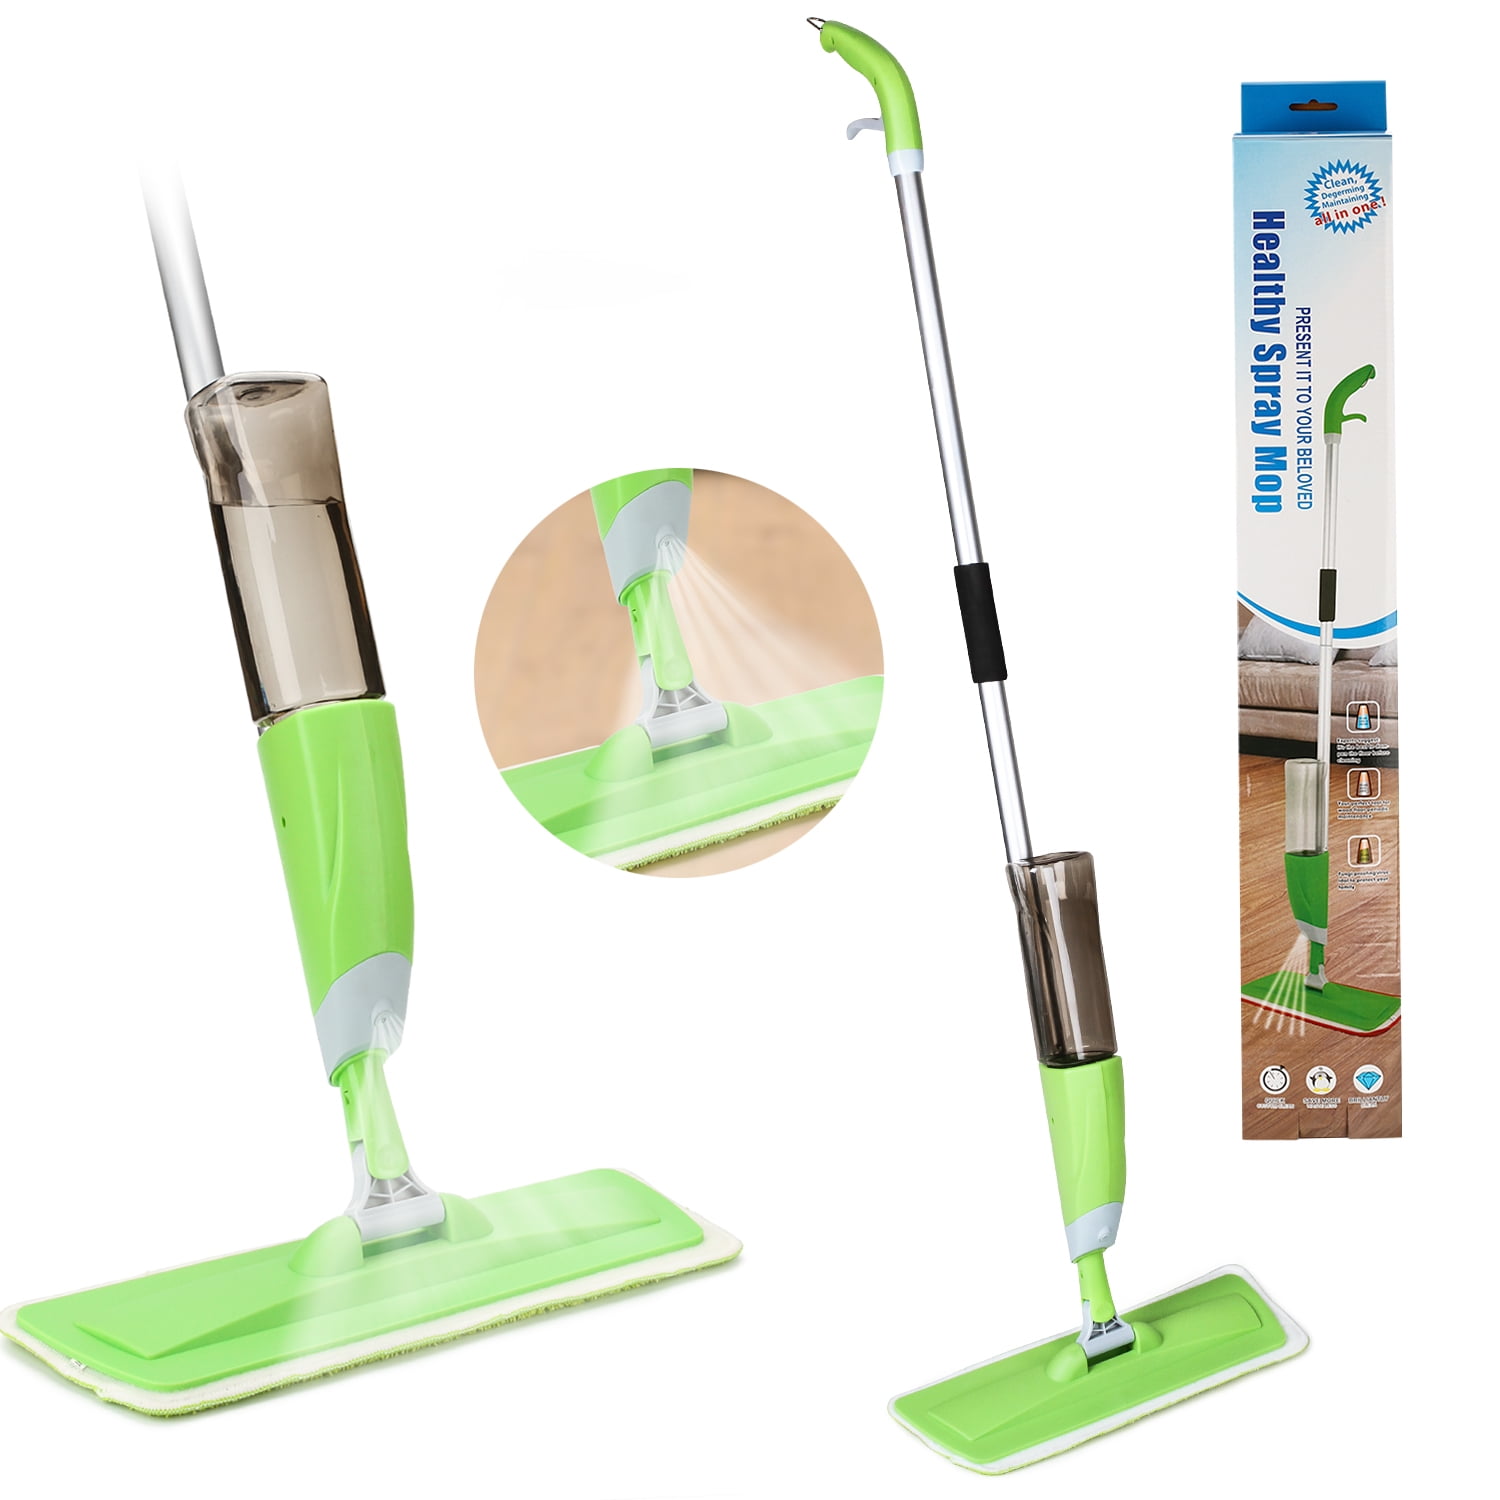 Hardwood Floor Spray Mop,Aiglam Floor Mop for Floor & Window,360 Degree Floor Cleaner with 4 Free Reusable Microfiber Pads with Scrub Brush and Refillable Bottle for Laminate Tile Wood 